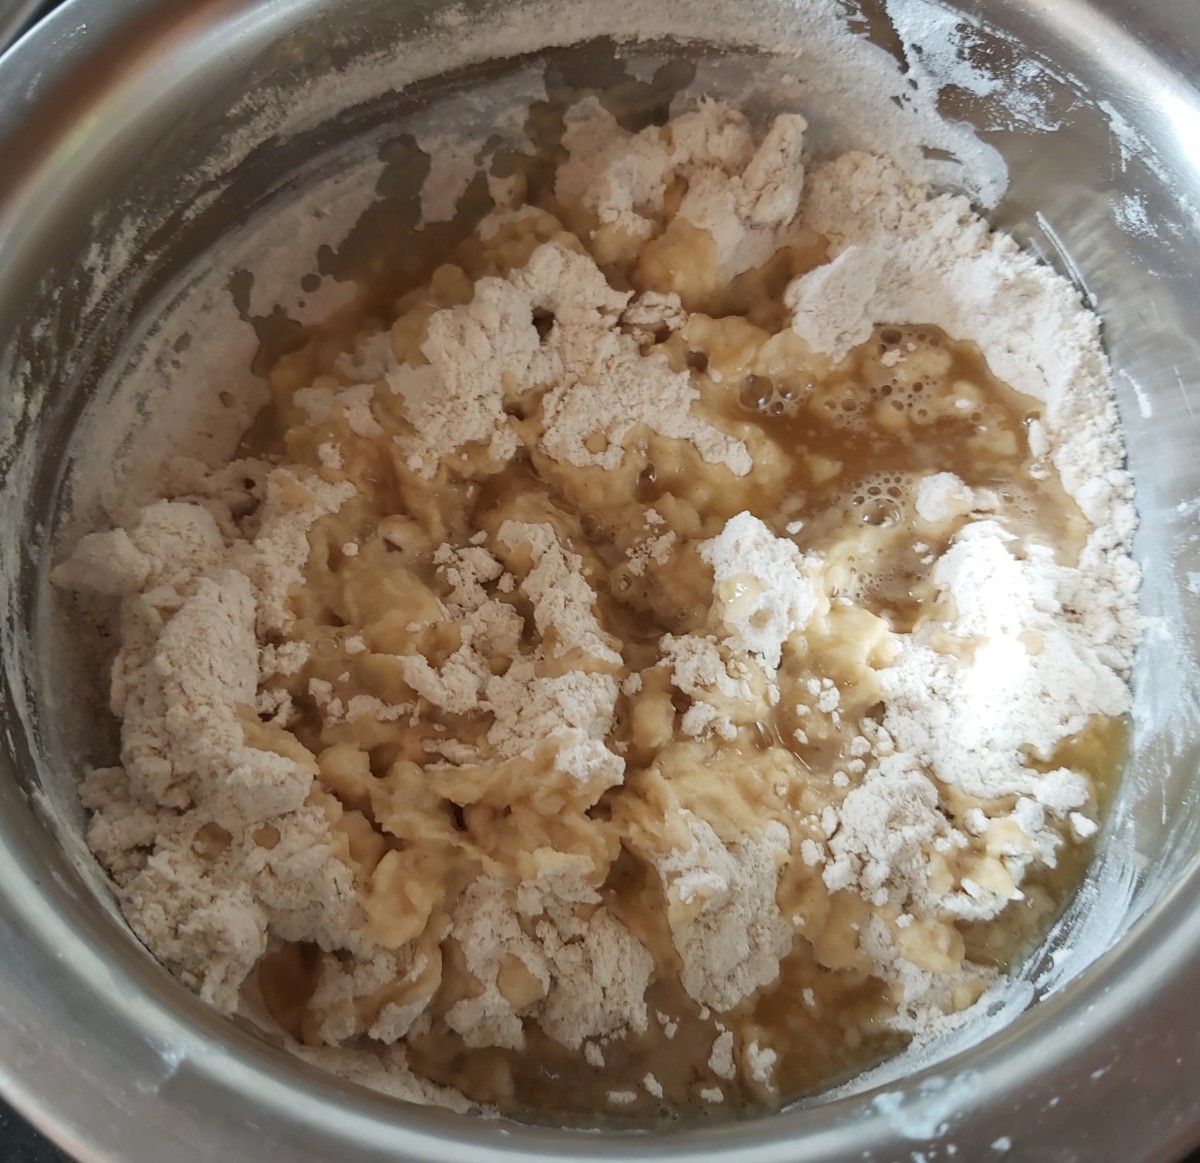 Gradually add jaggery syrup to the flour mixture. Mix well.